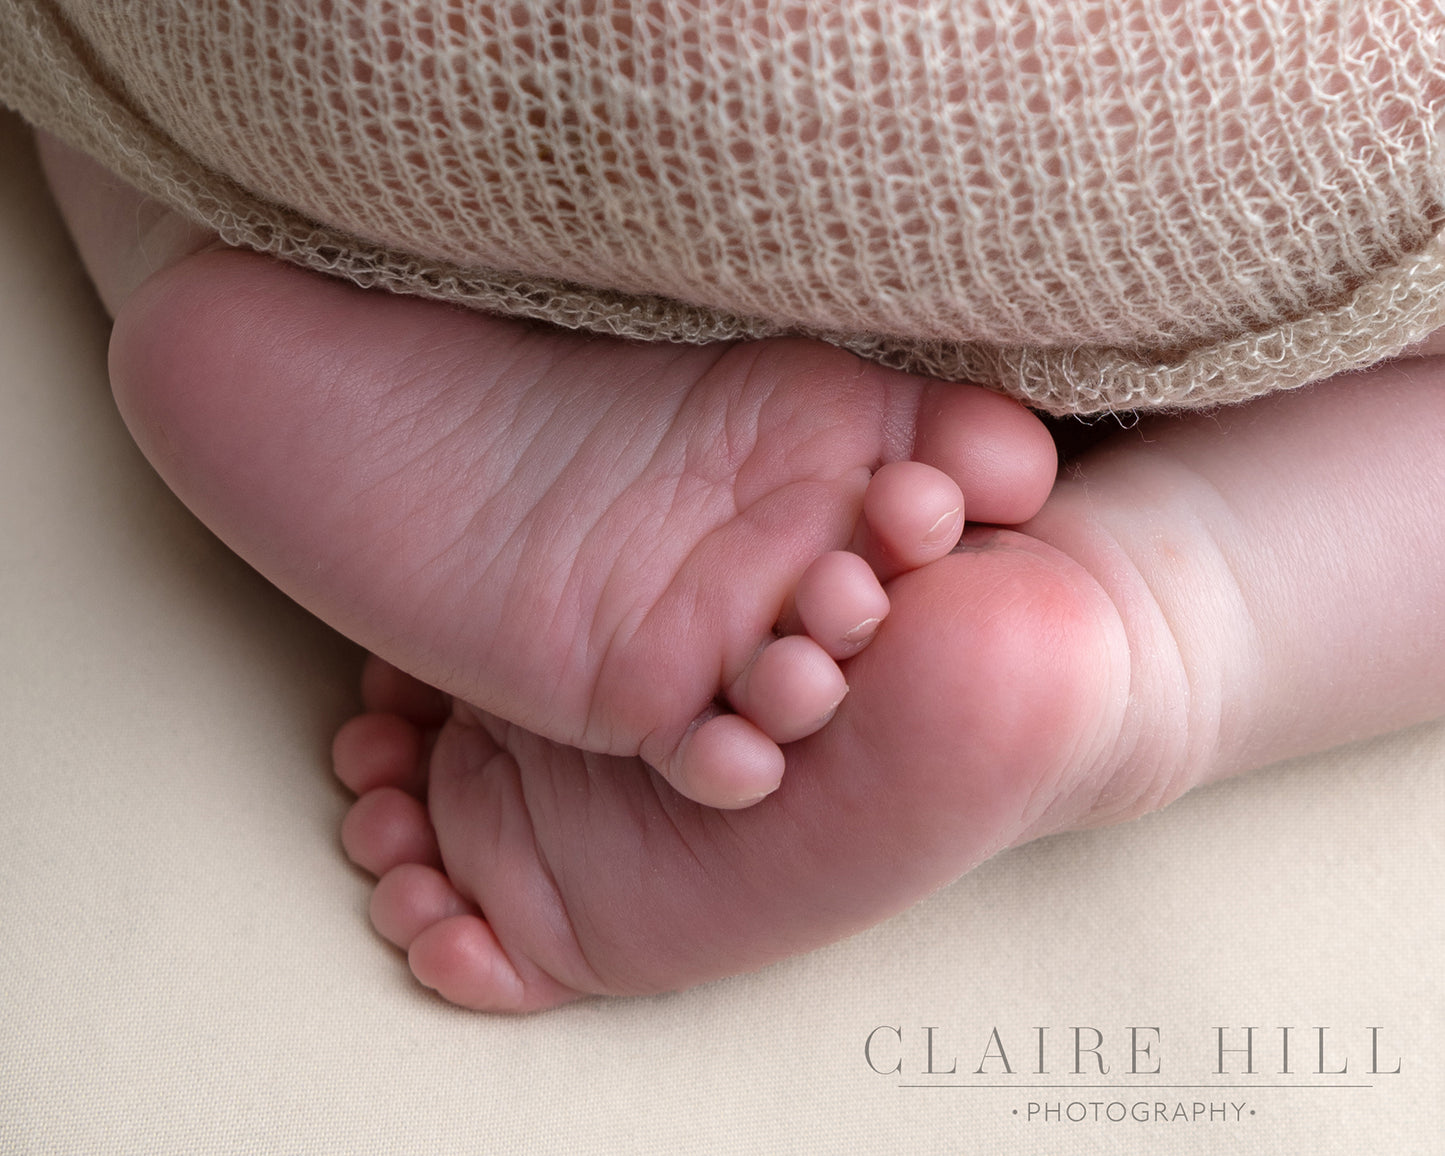 Beautiful newborn baby photography photos by Award winning Claire Hill Photography. Studio based in  Perton Wolverhampton West Midlands and Shropshire near Birmingham & Staffordshire book today